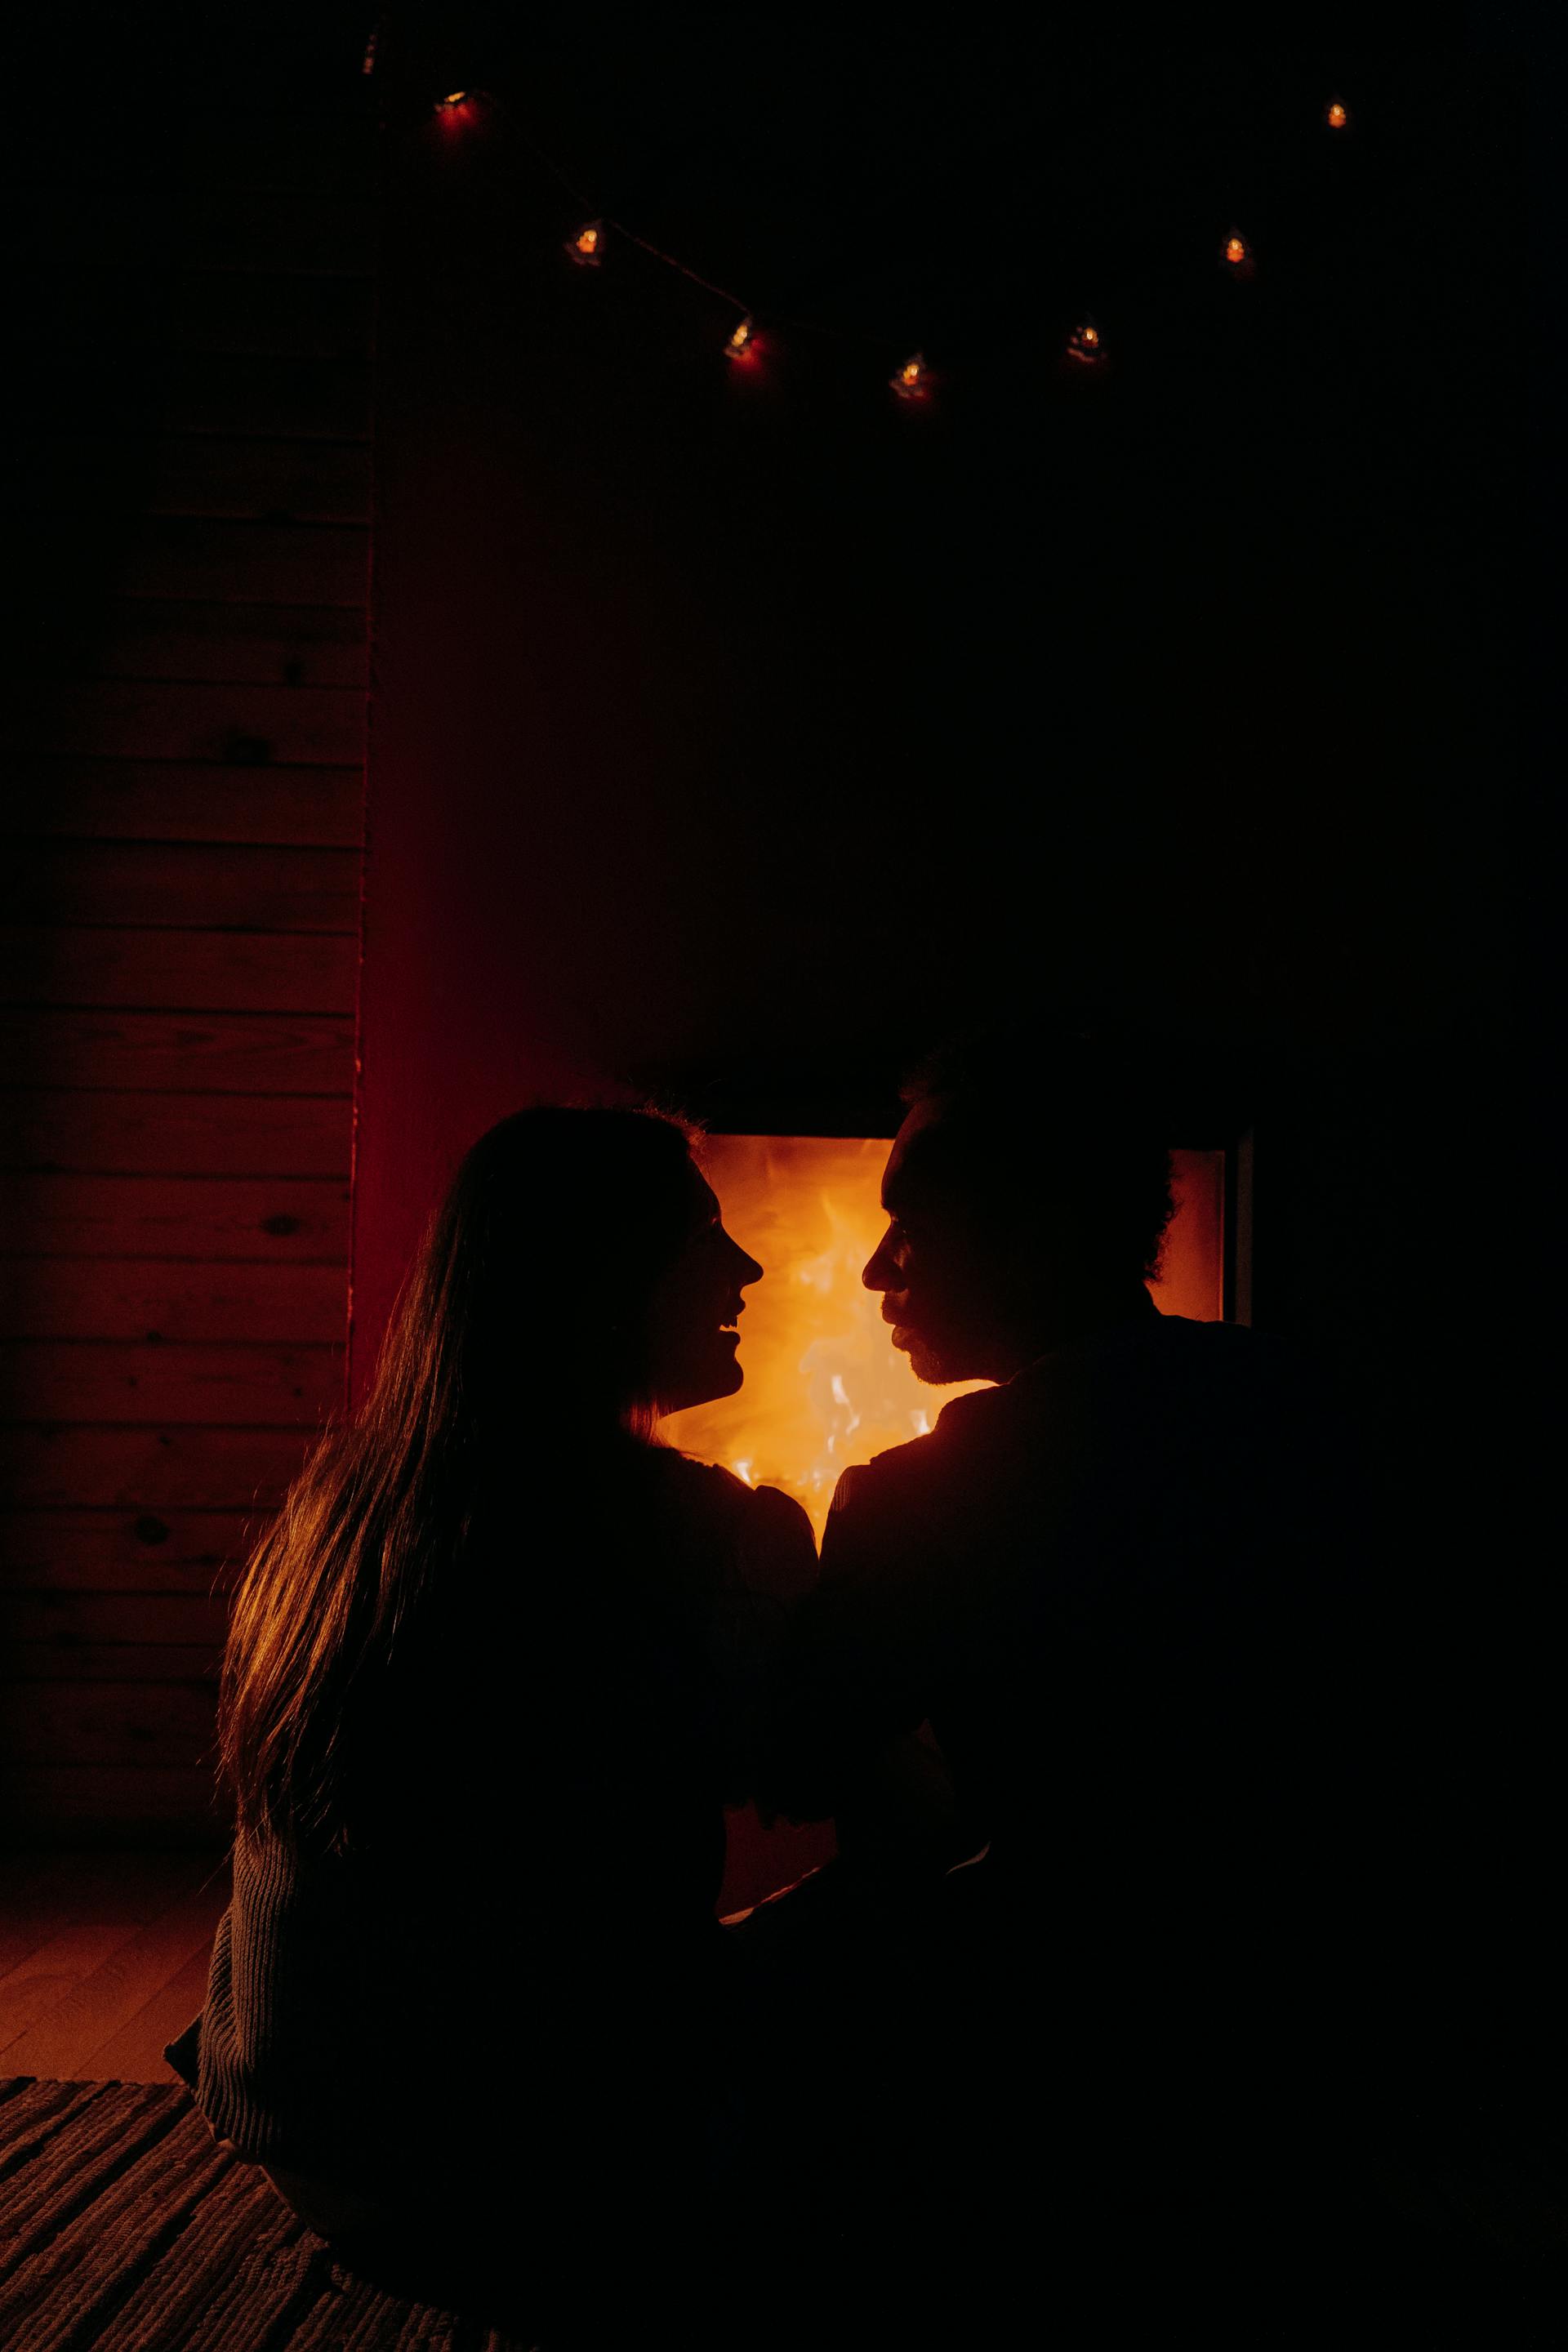 A couple sitting in front of a fire | Source: Pexels